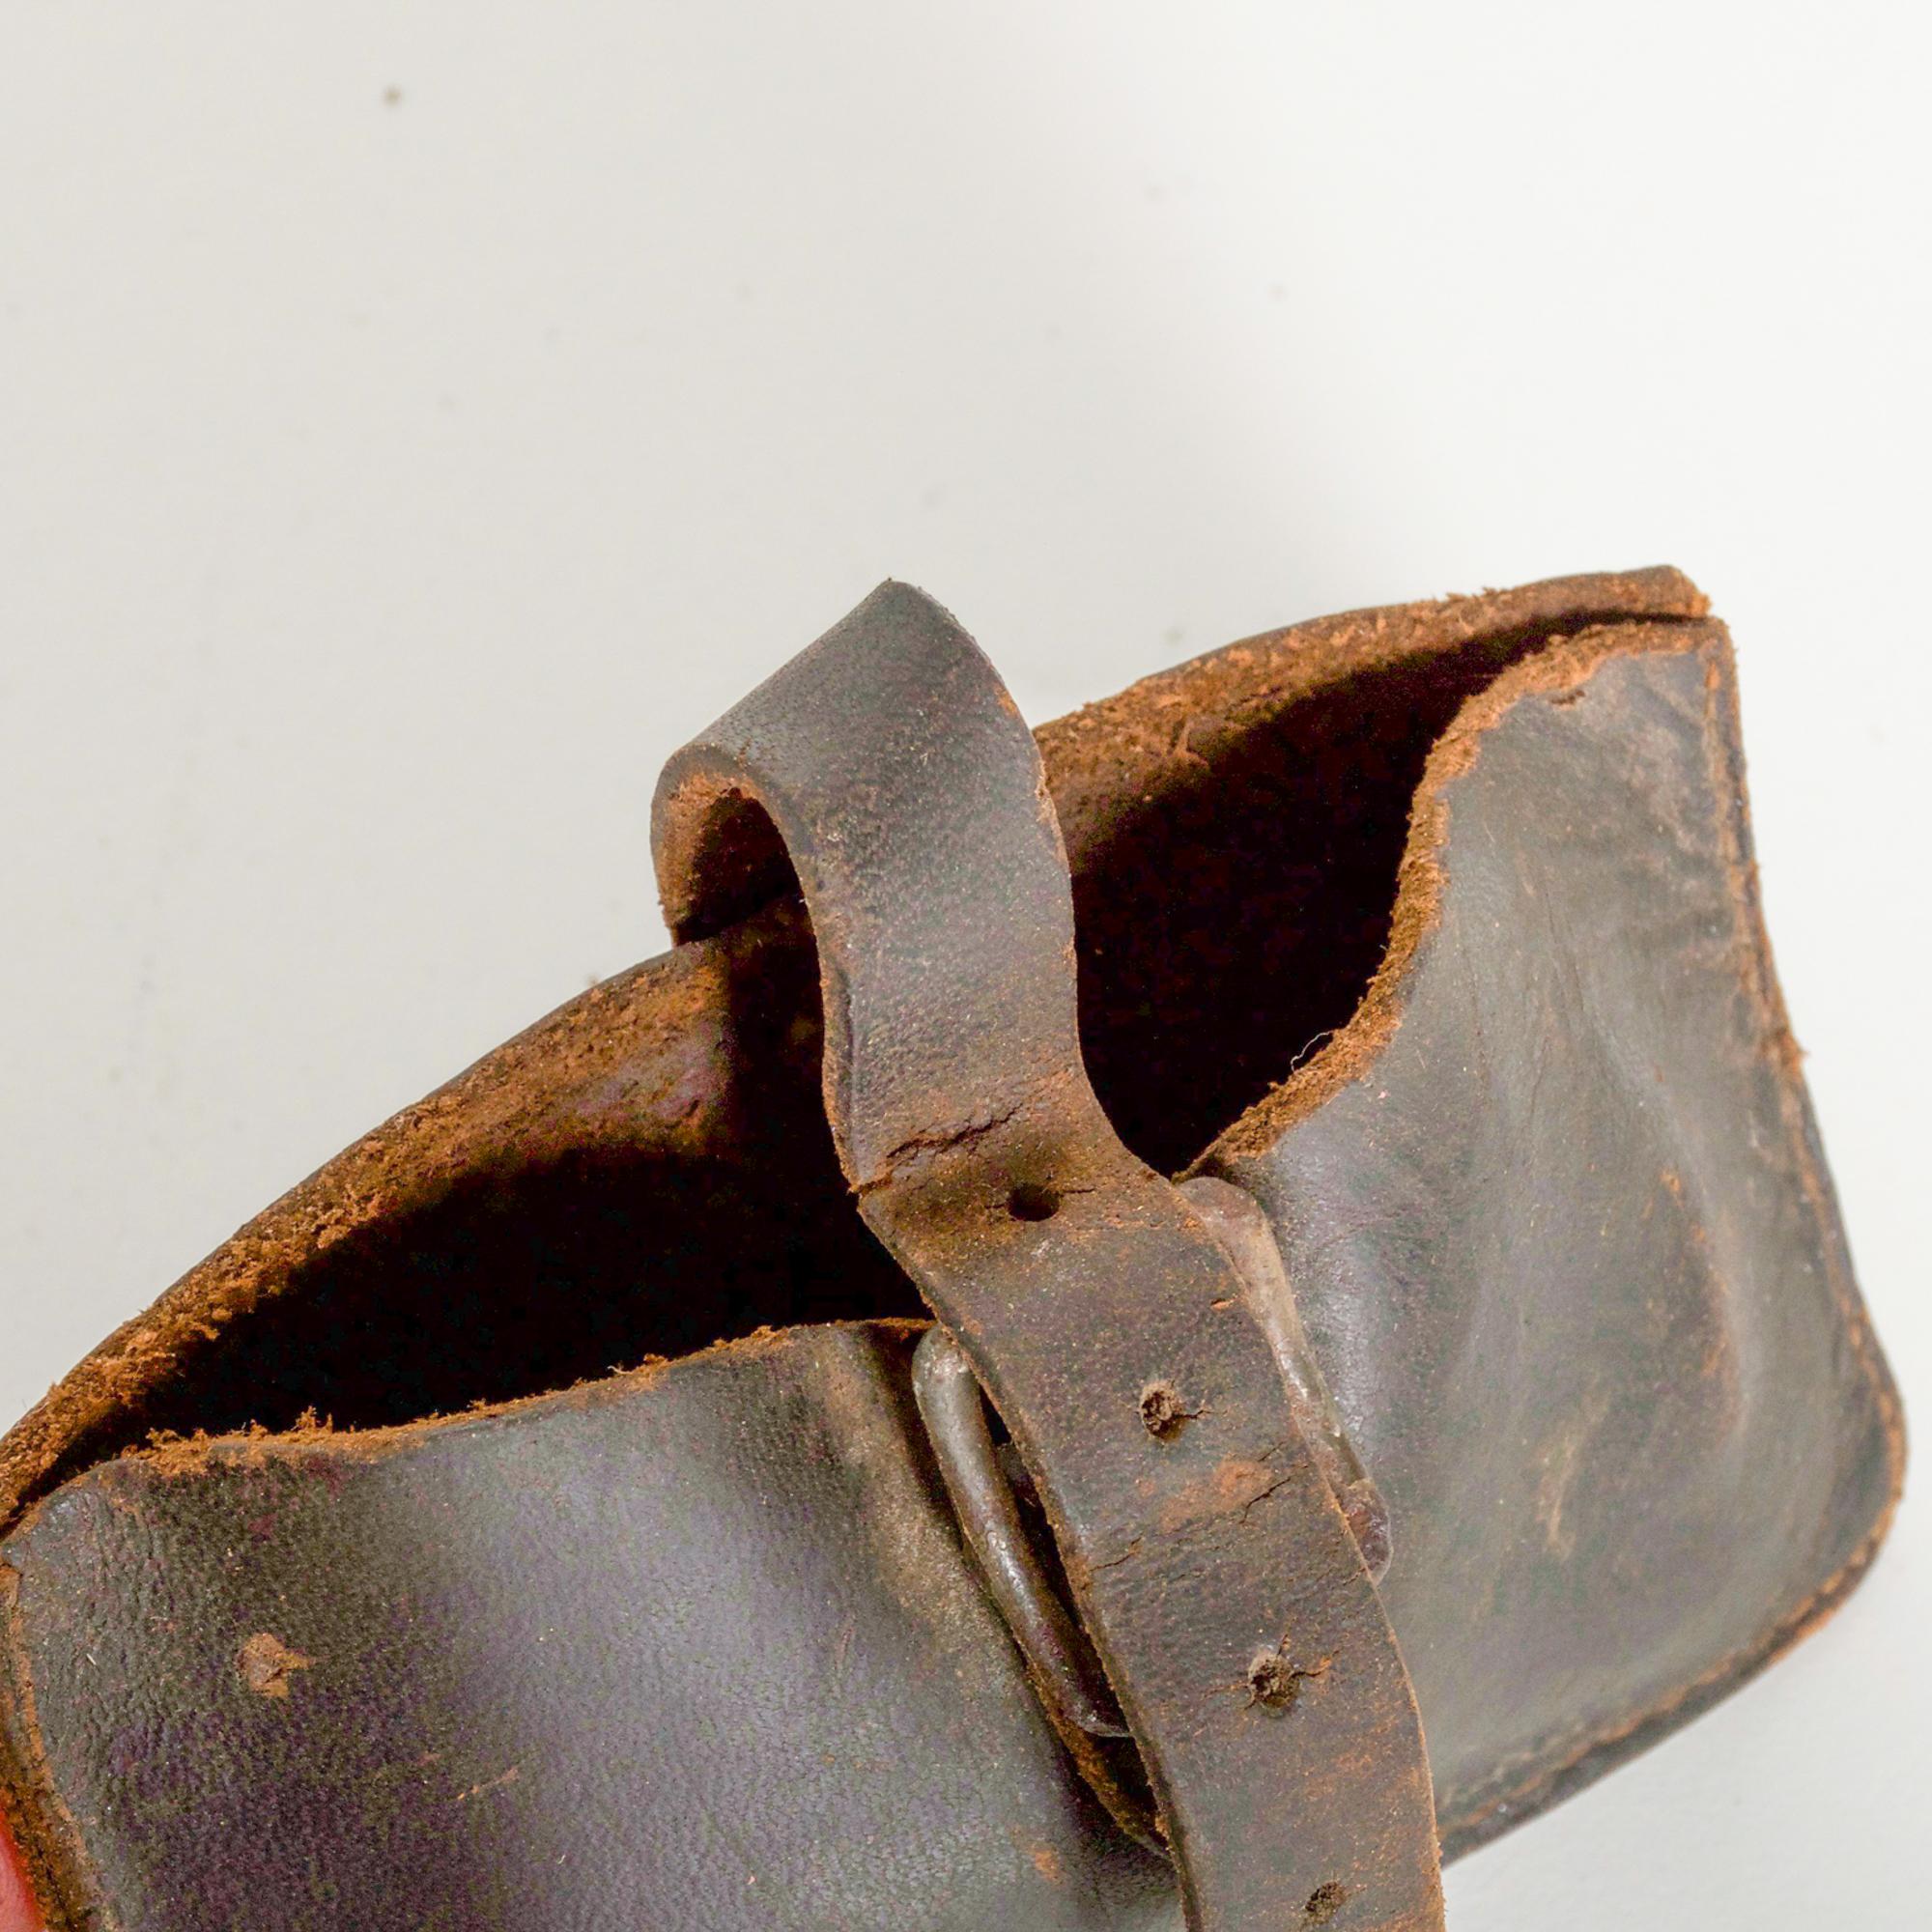 AMBIANIC presents
Antique Small Leather Money Purse Wallet Coin Pouch Change Purse Belt Accessory
Distressed Aged Leather Small Wallet with Buckle Closure. Worcester Stamped. Fabulous wear visible.
Measures: 3.75 W x 3.25 H x 1D
Original distressed